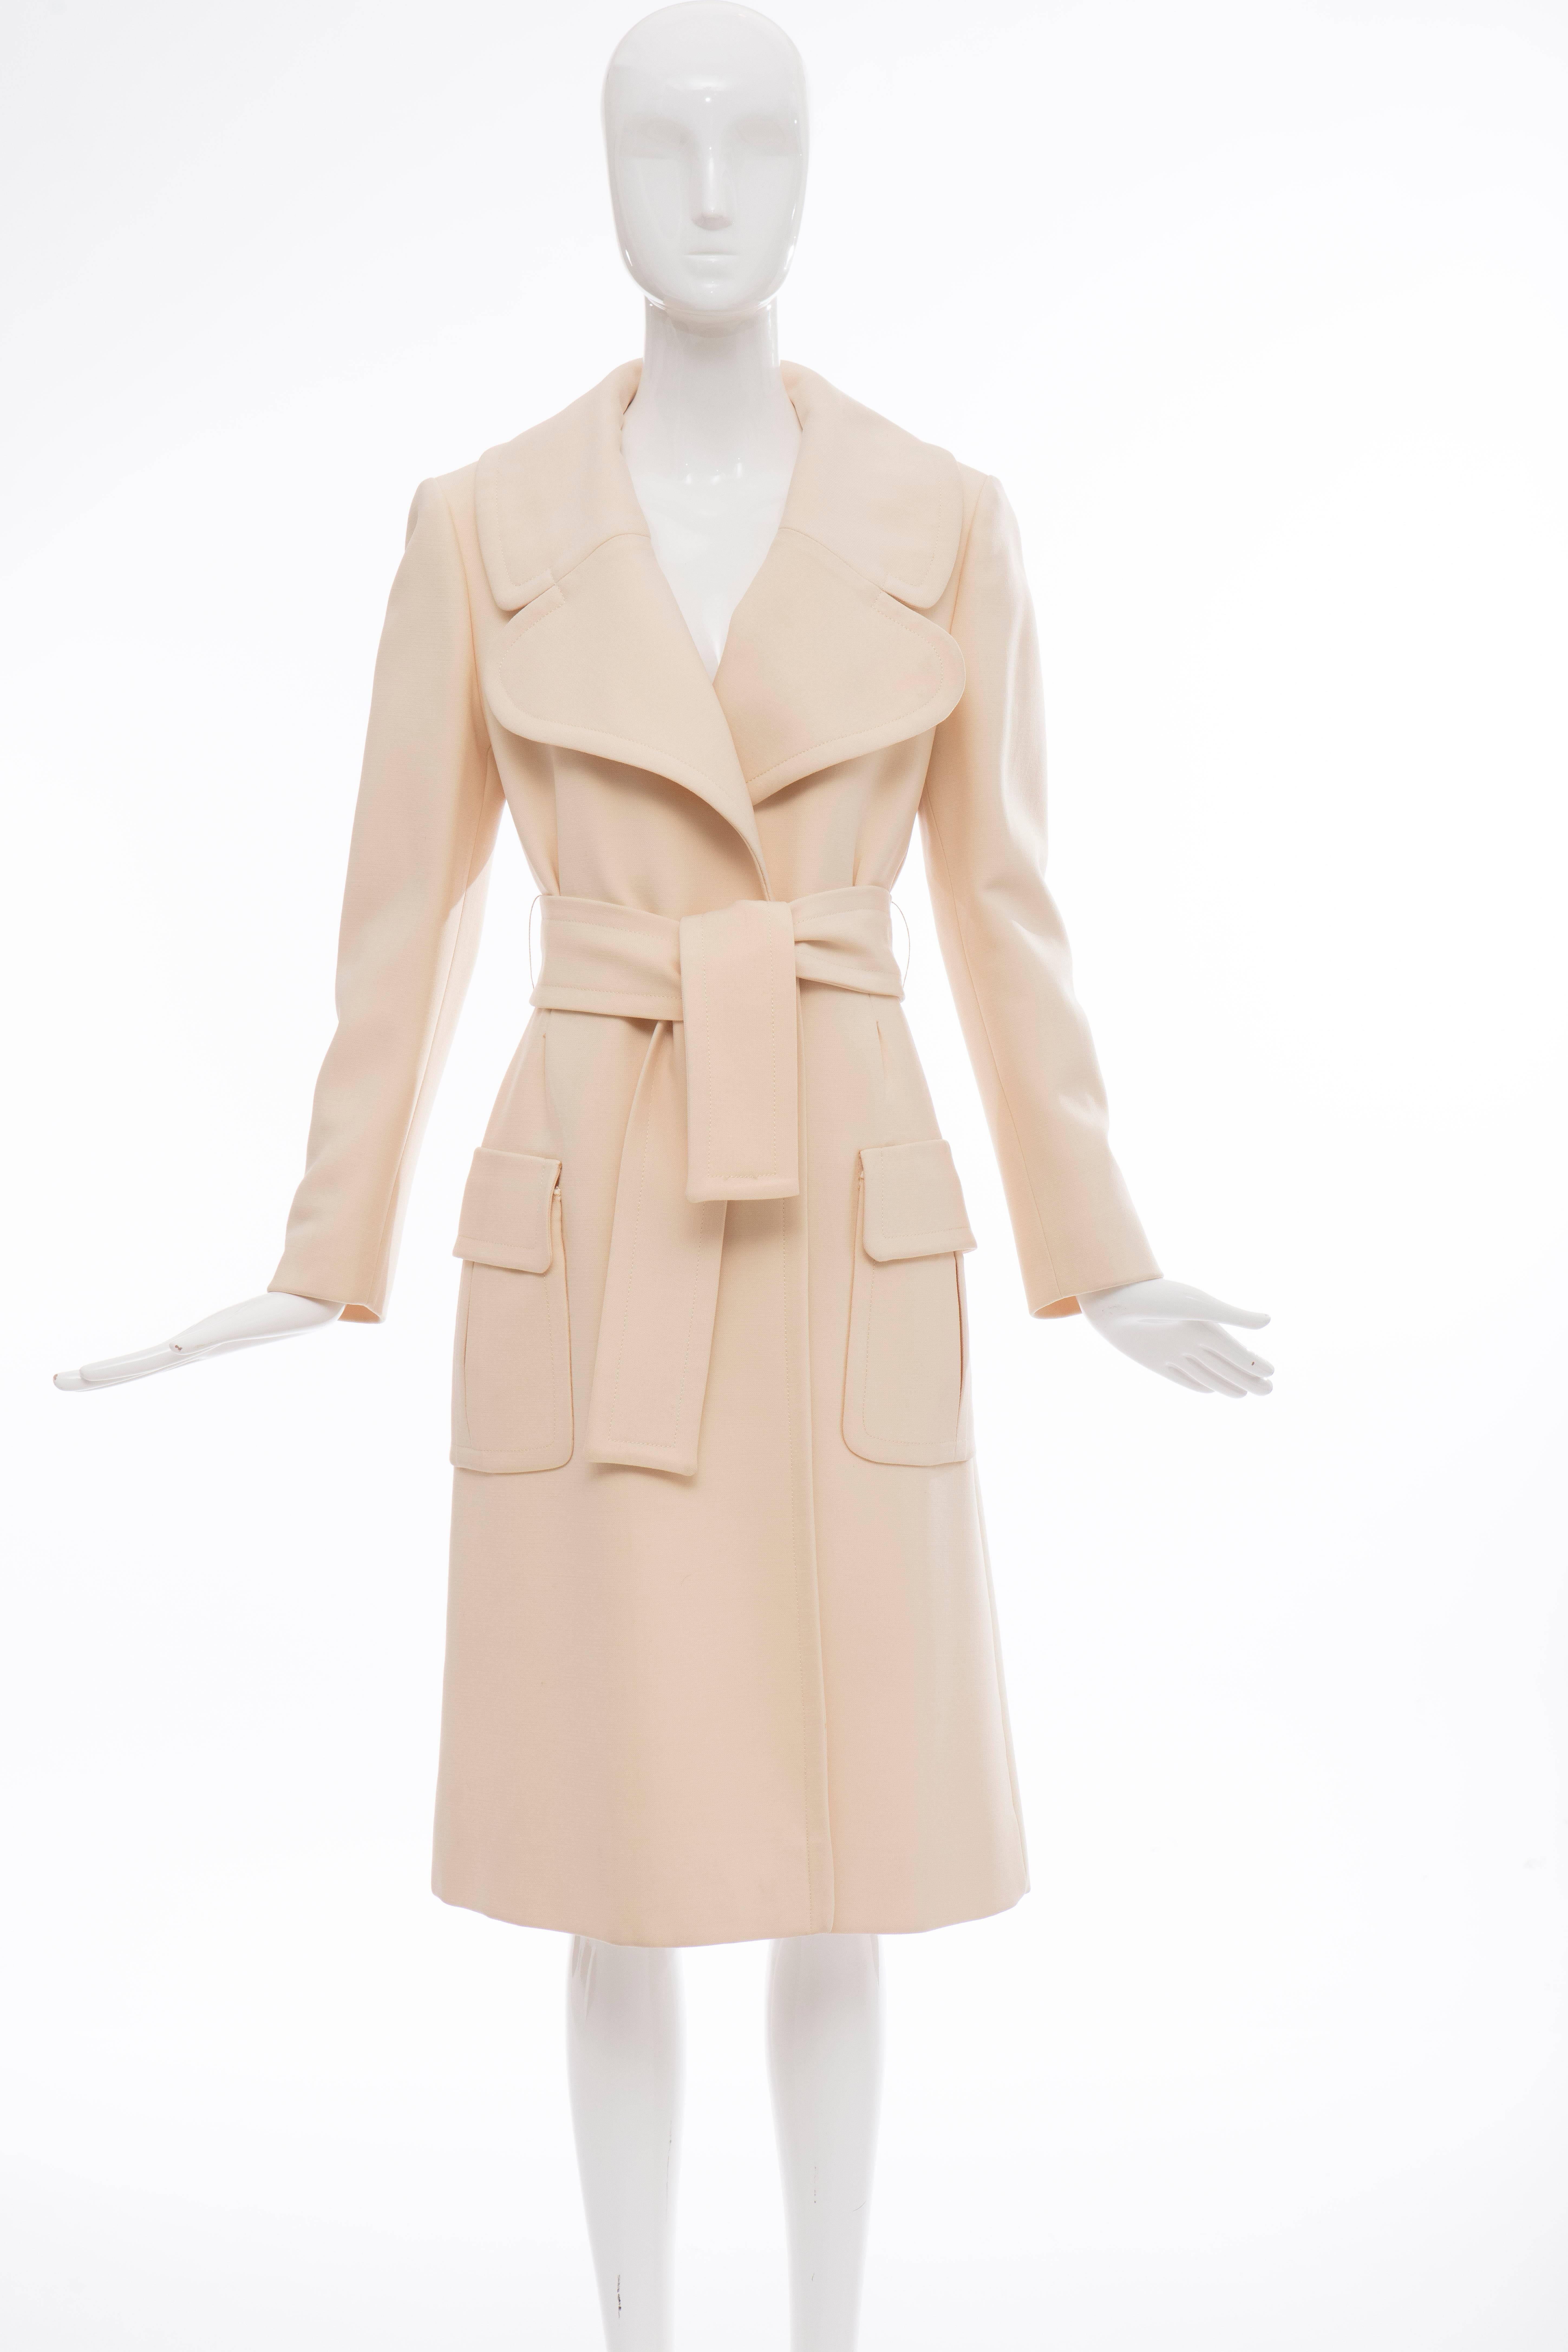 John Anthony, Circa 1980's cream wool gabardine snap front coat with self belt, two front pockets and fully lined.

No Size Label

Bust 38, Waist 34, Hips 38, Sleeve 23, Length 43